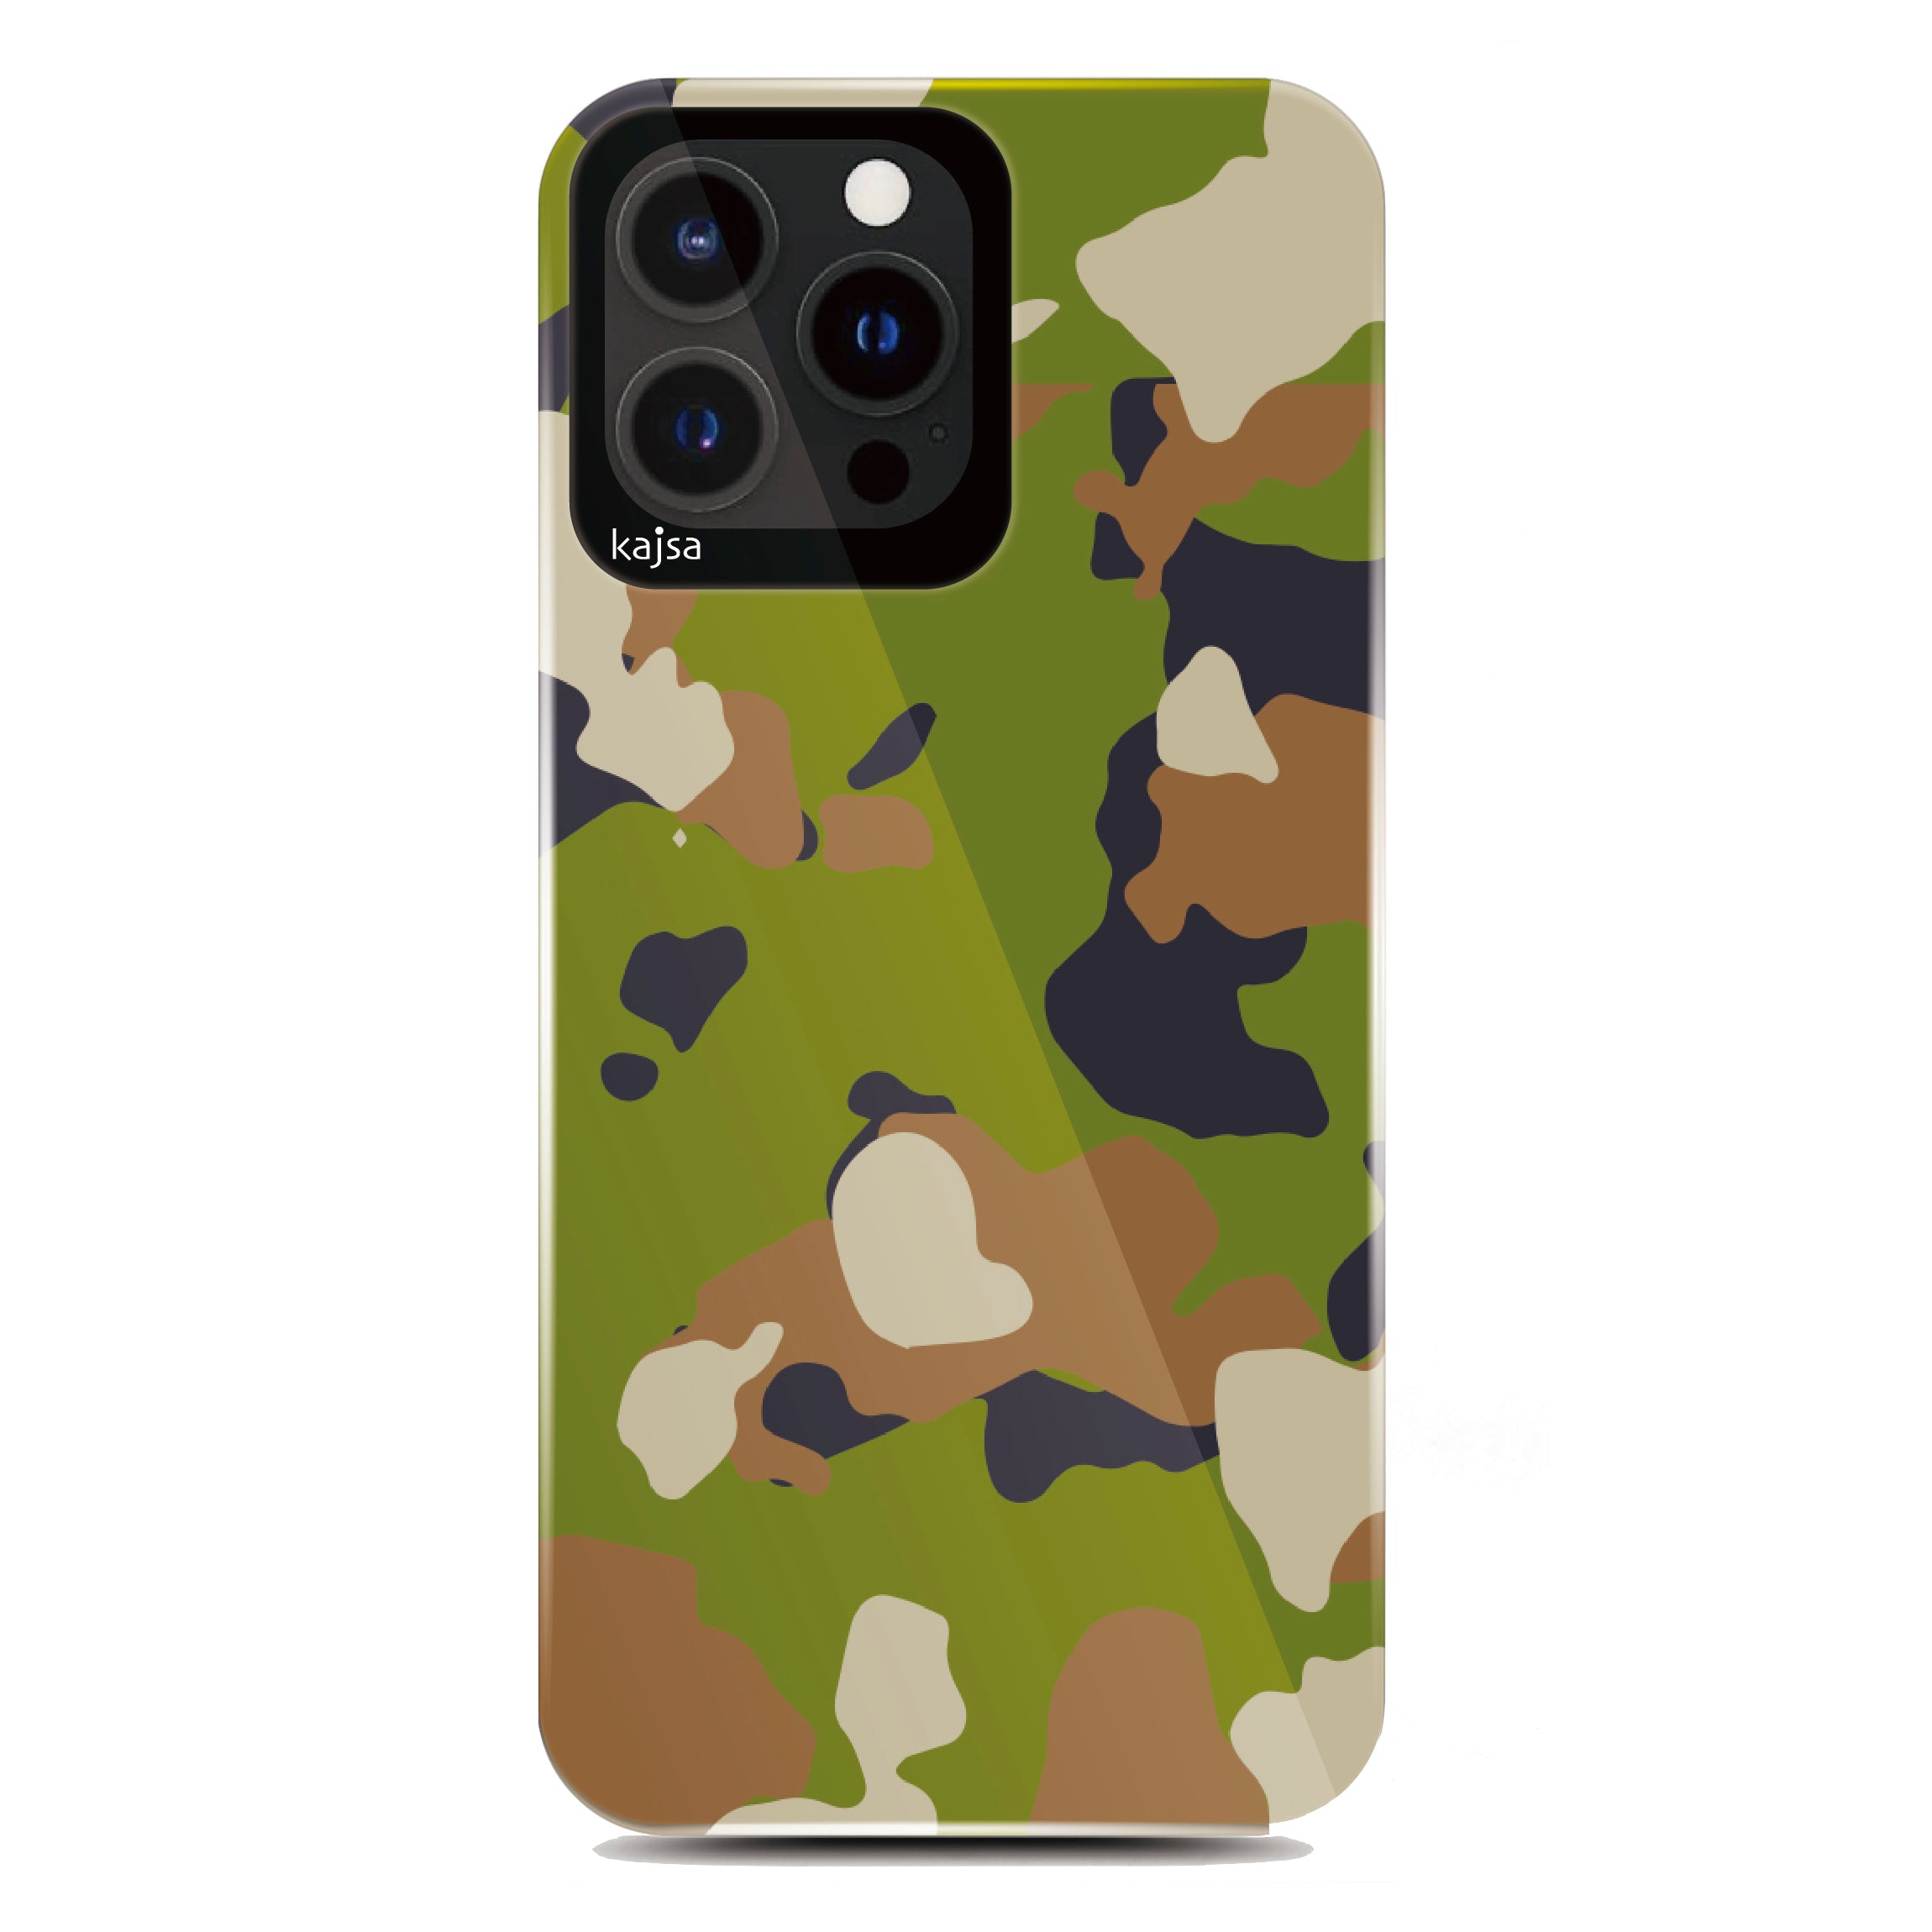 Trans-Shield Collection - Camo Pattern Back Cover for iPhone 13-Phone Case- phone case - phone cases- phone cover- iphone cover- iphone case- iphone cases- leather case- leather cases- DIYCASE - custom case - leather cover - hand strap case - croco pattern case - snake pattern case - carbon fiber phone case - phone case brand - unique phone case - high quality - phone case brand - protective case - buy phone case hong kong - online buy phone case - iphone‎手機殼 - 客製化手機殼 - samsung ‎手機殼 - 香港手機殼 - 買電話殼